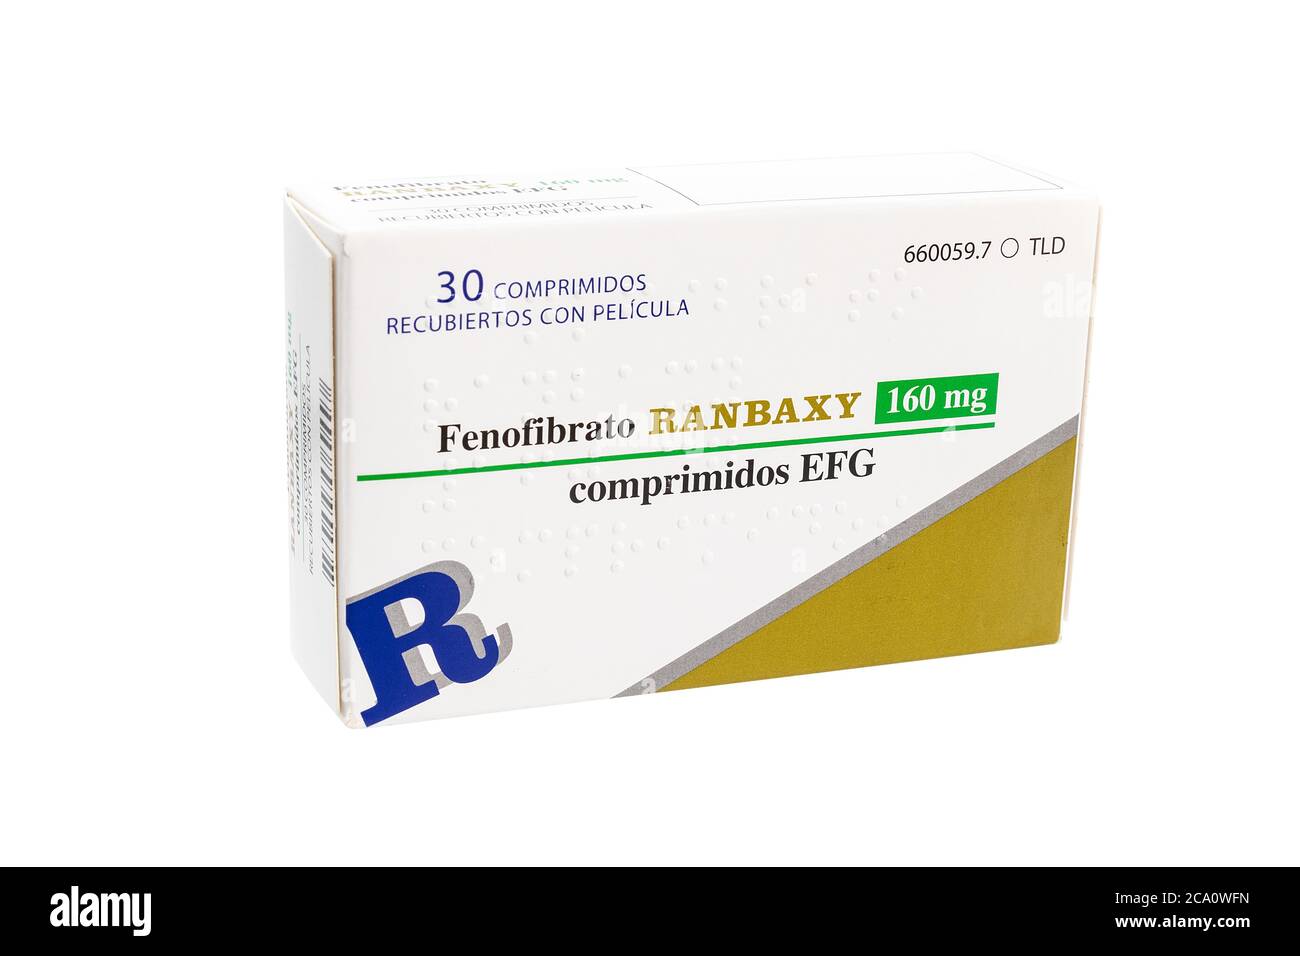 Huelva, Spain - July 23, 2020: Spanish Box of Fenofibrate brand Randaxy, is a medication of the fibrate class used to treat abnormal blood lipid level Stock Photo